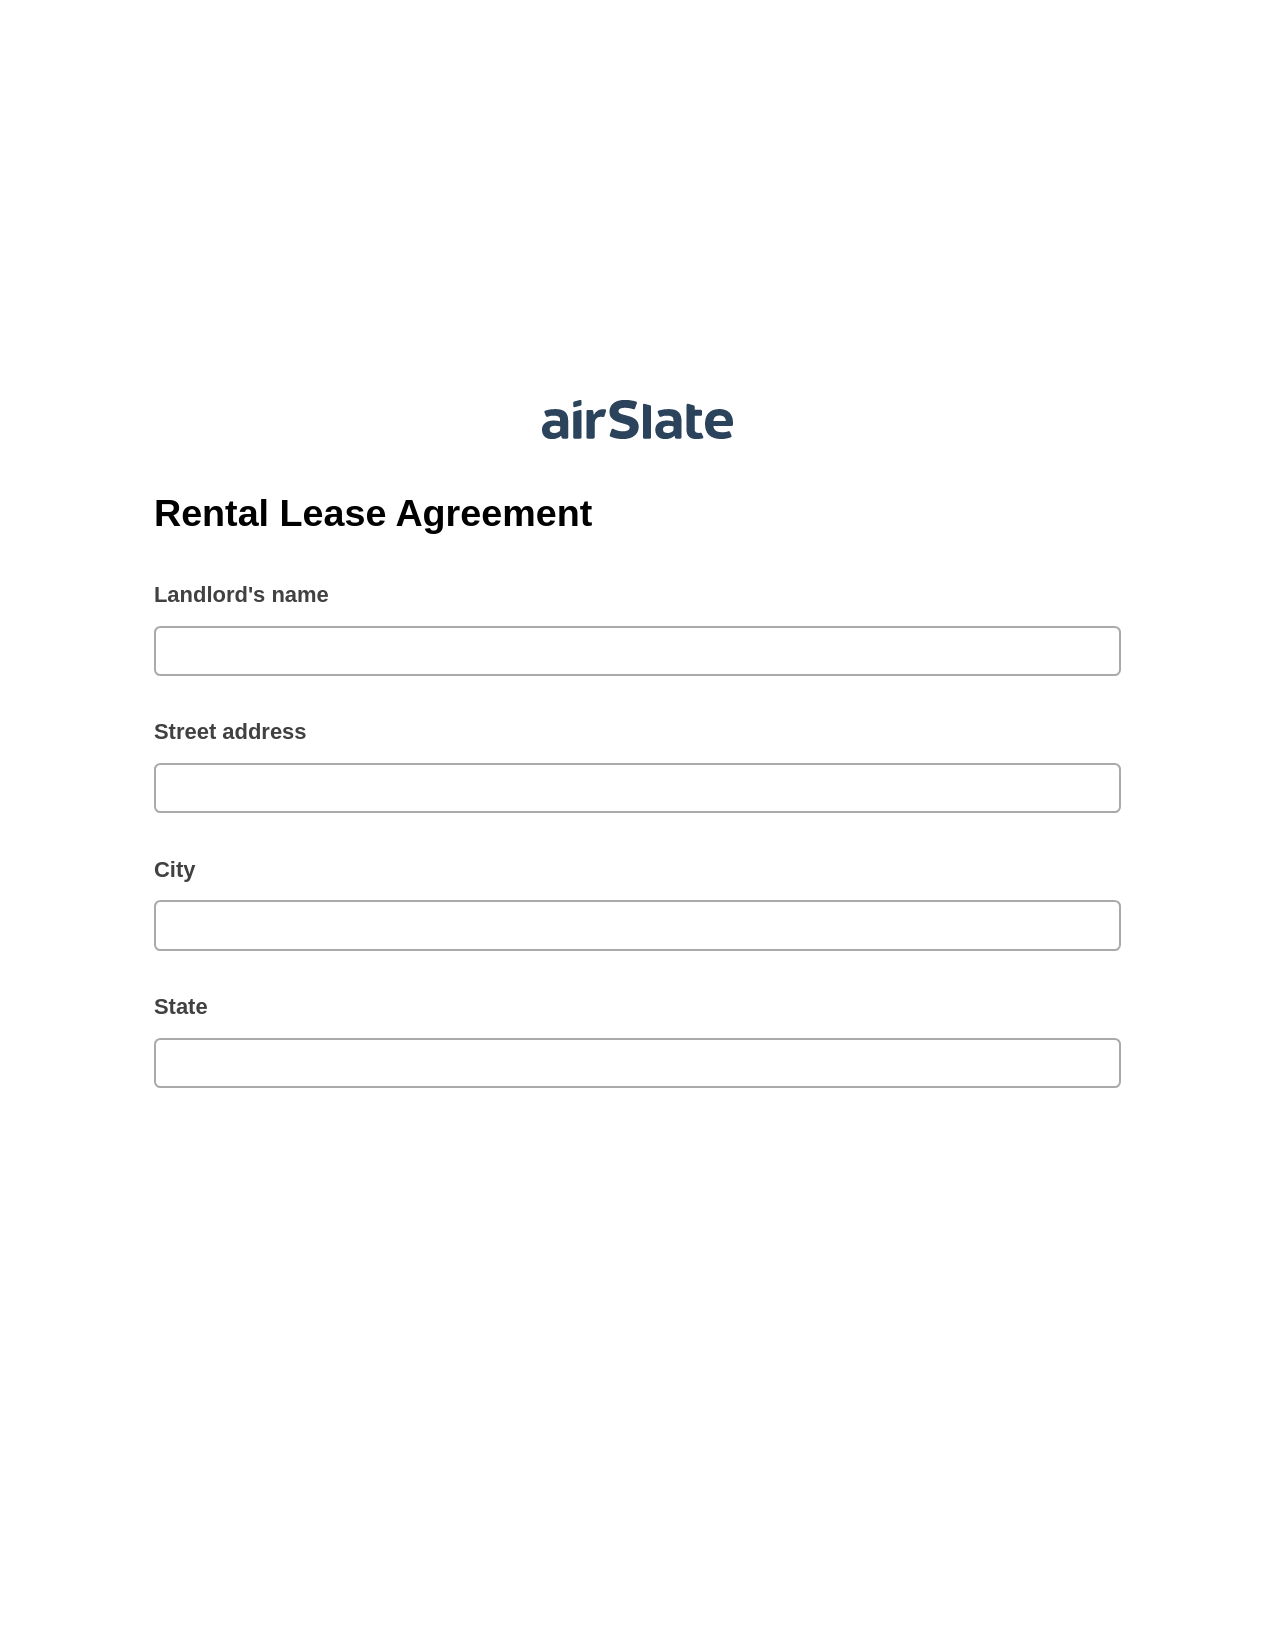 Multirole Rental Lease Agreement Pre-fill from Excel Spreadsheet Dropdown Options Bot, Jira Bot, Export to Excel 365 Bot